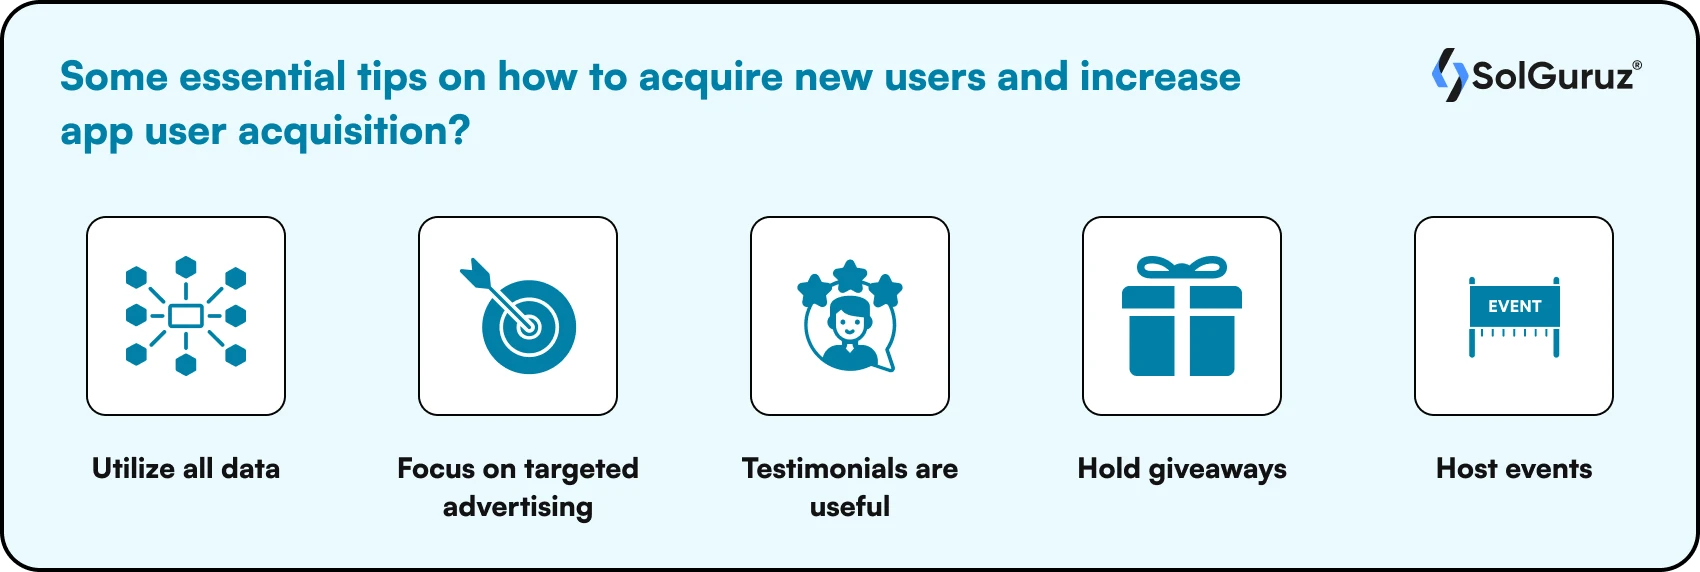 Some essential tips on how to acquire new users and increase app user acquisition